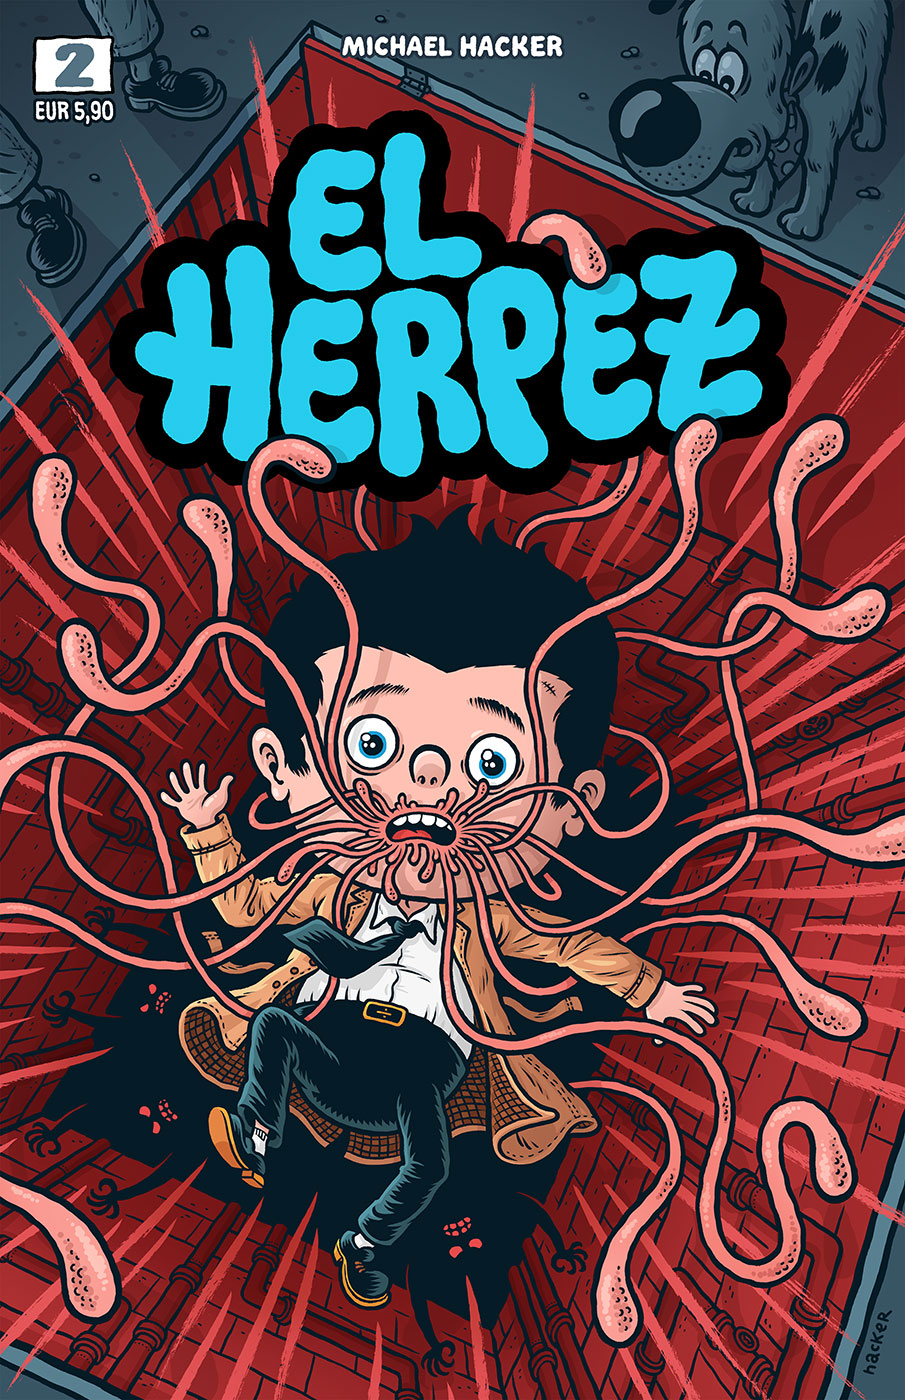 El Herpez #2 is available for pre-order!